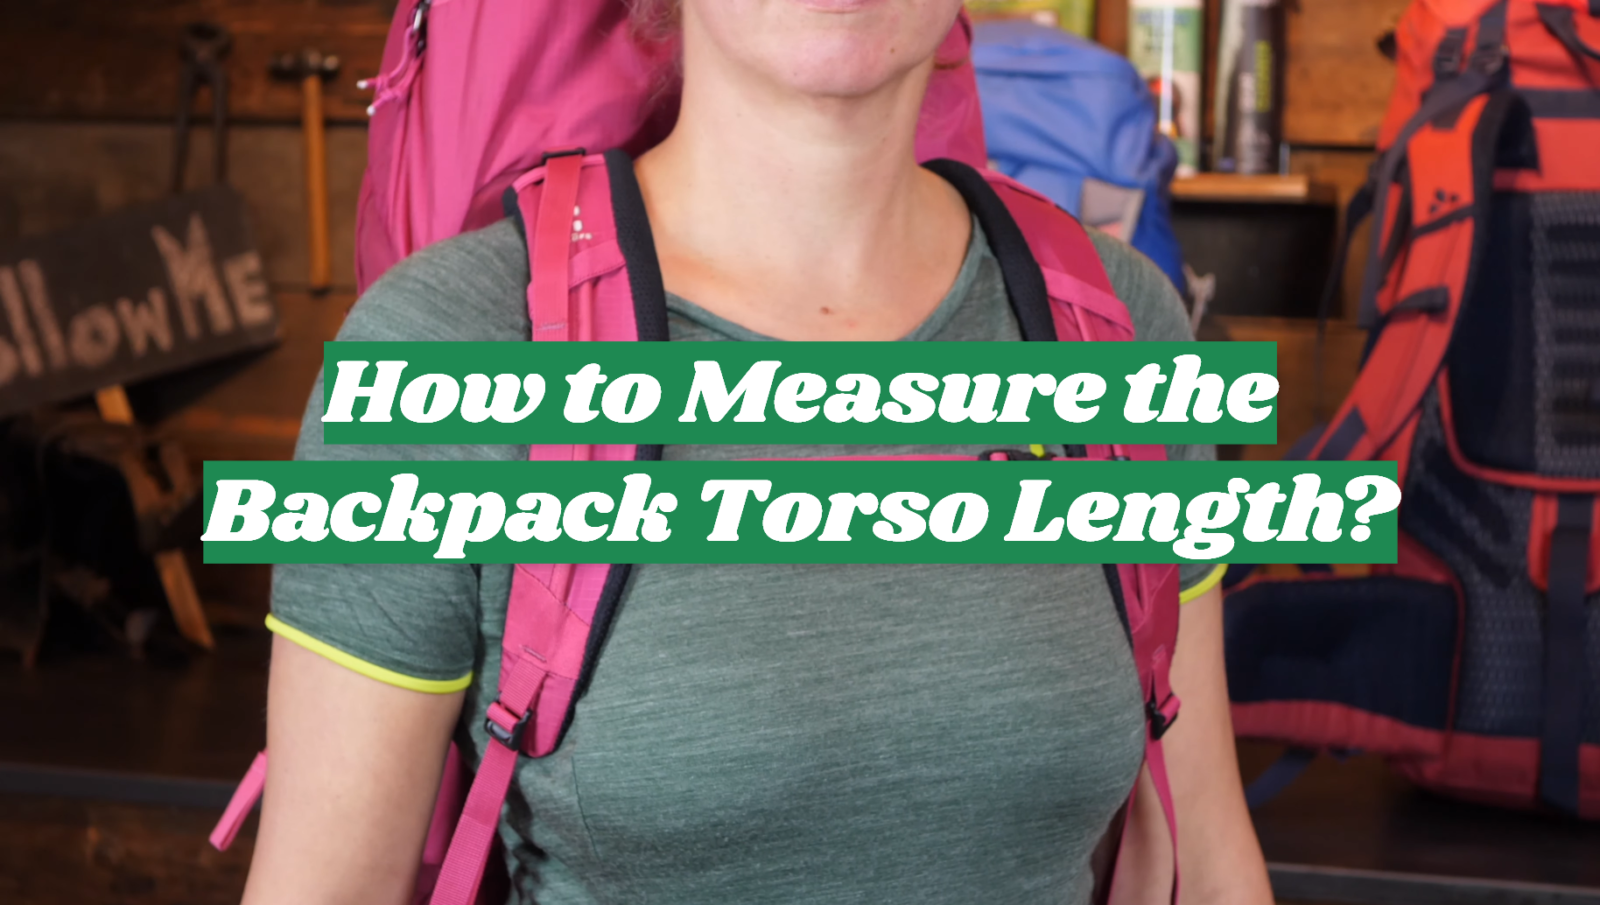 How to Measure the Backpack Torso Length?